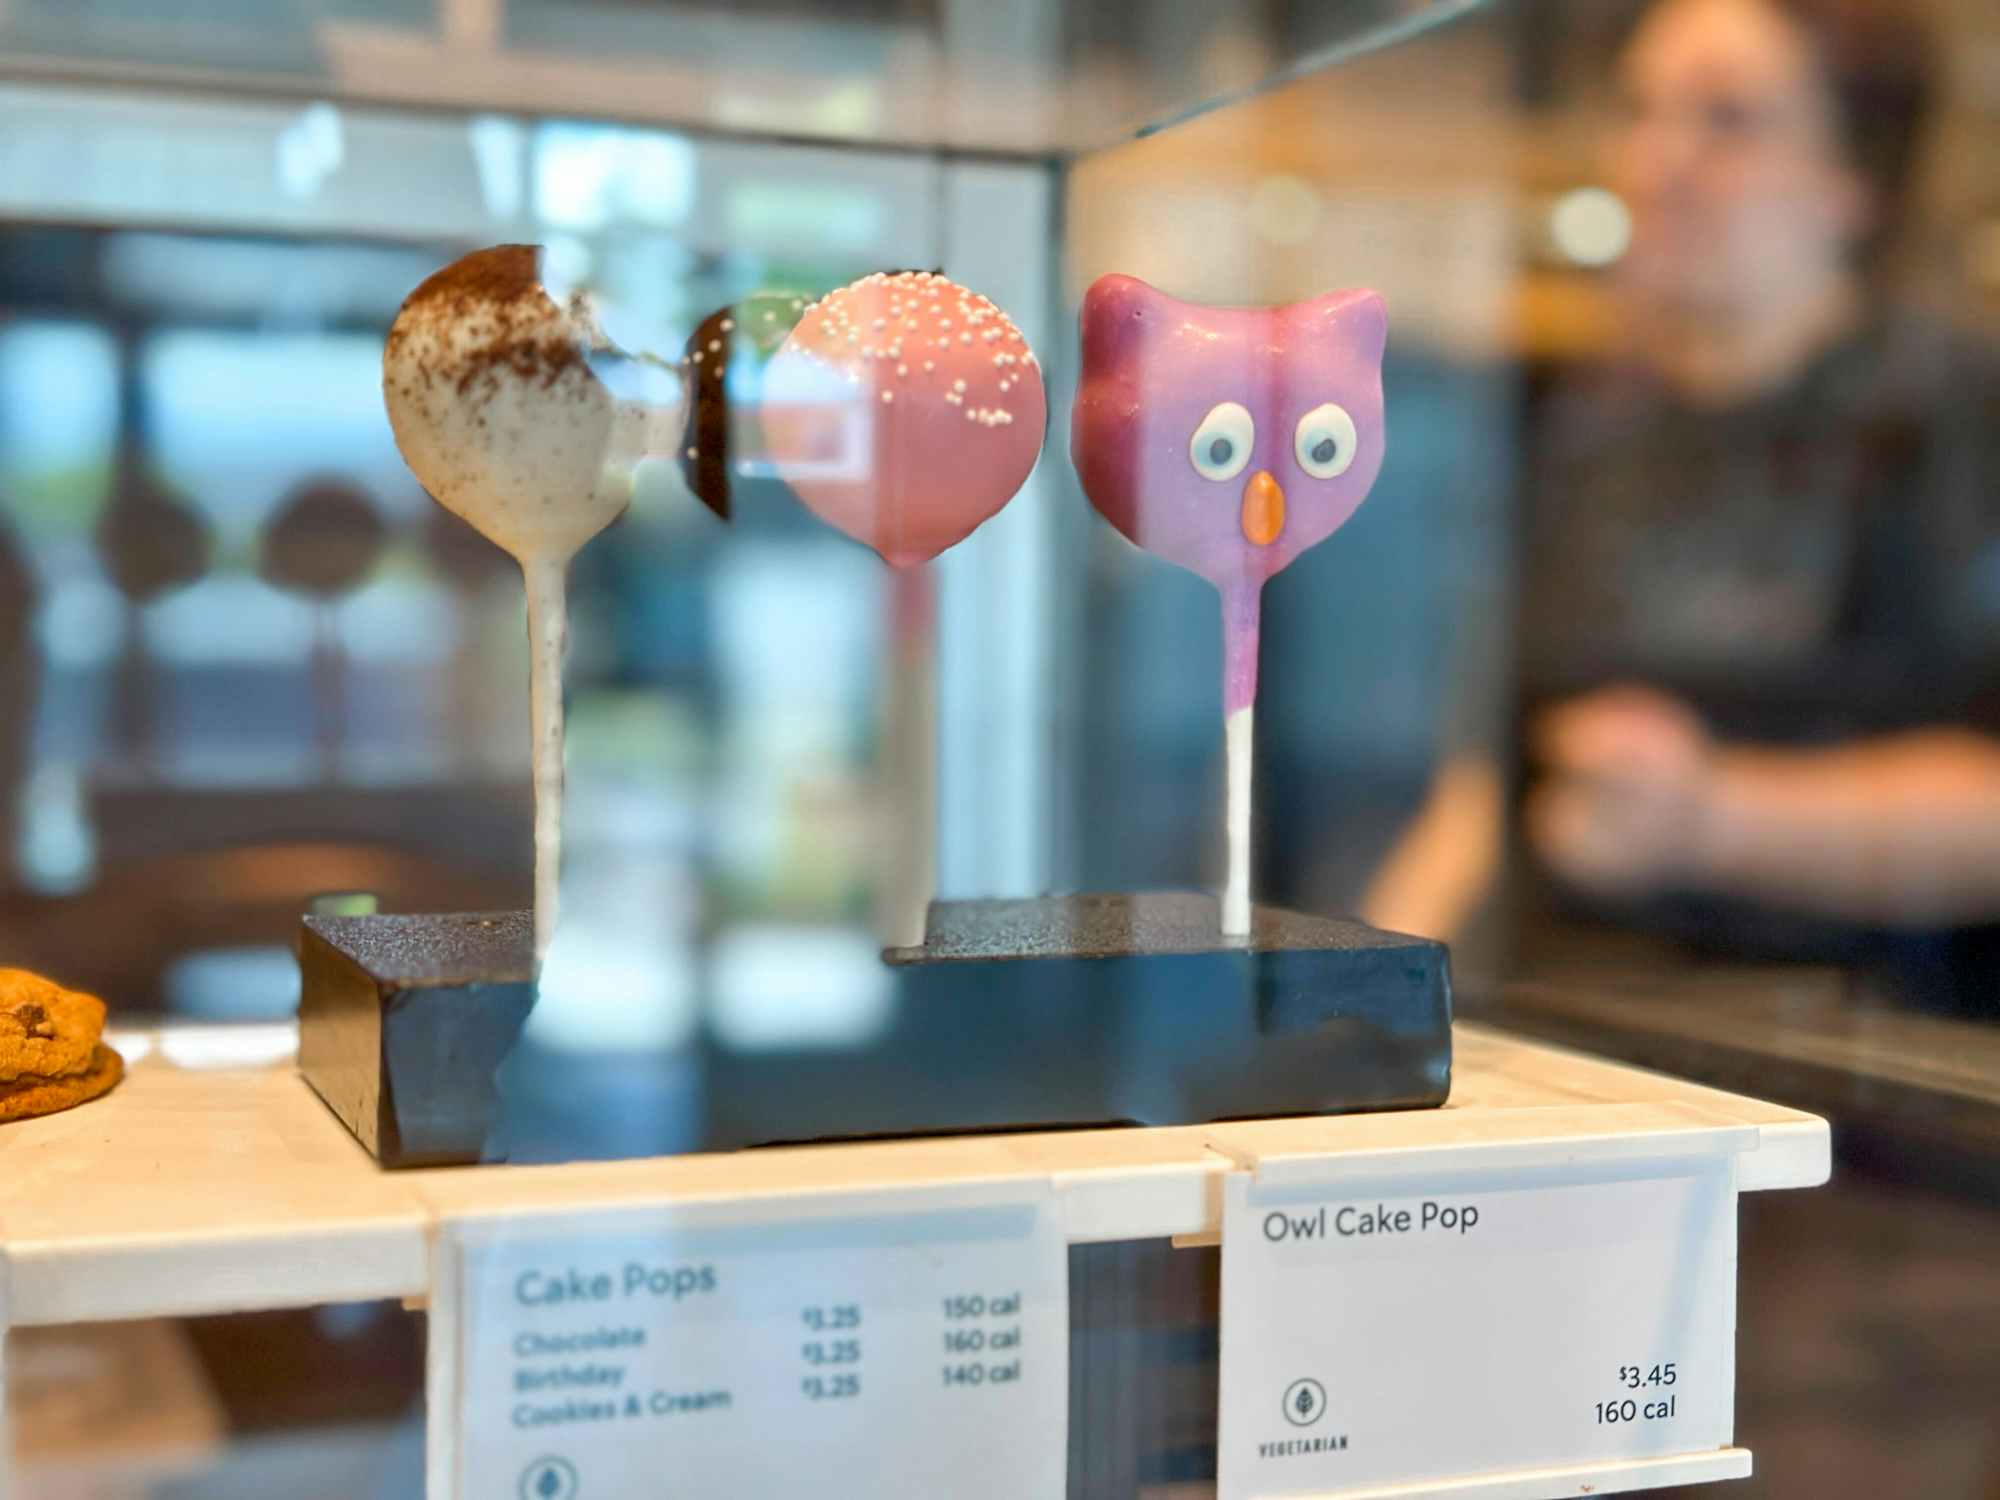 the food display case at Starbucks with an owl cake pop from the new fall menu